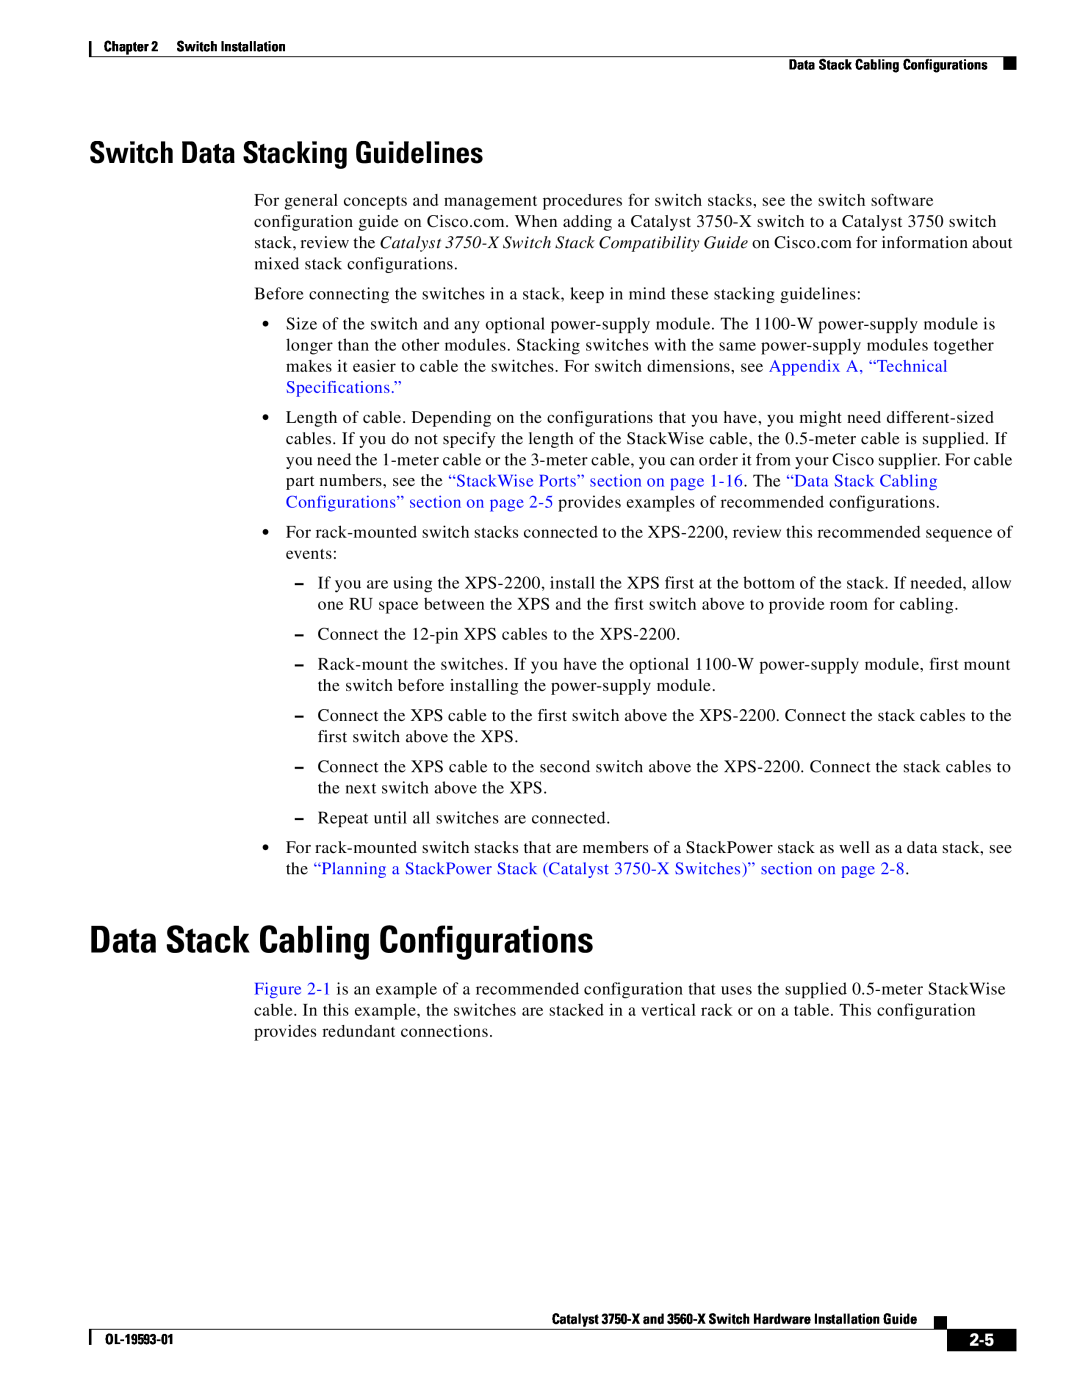 Cisco Systems 3560-X, 3750-X manual Data Stack Cabling Configurations, Switch Data Stacking Guidelines 